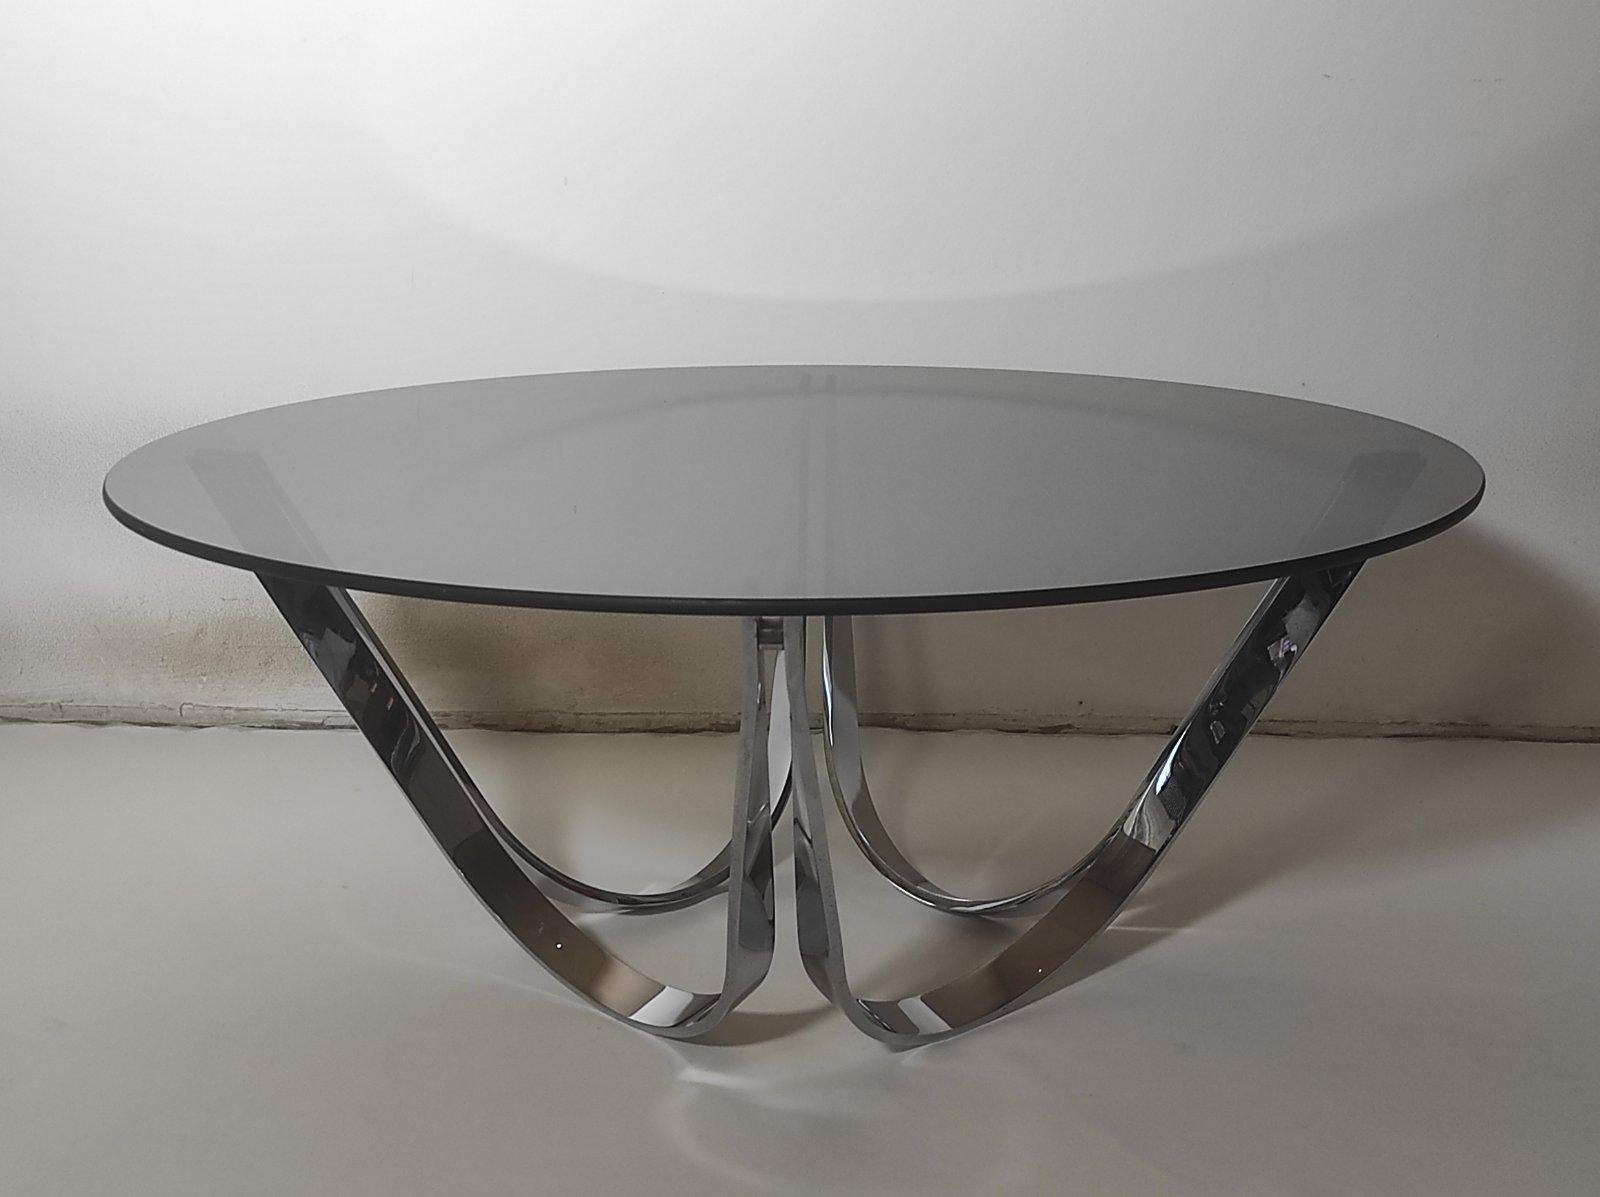 American Chrome and Smoked glass Coffee Table By Roger Sprunger for Dunbar 1970s For Sale